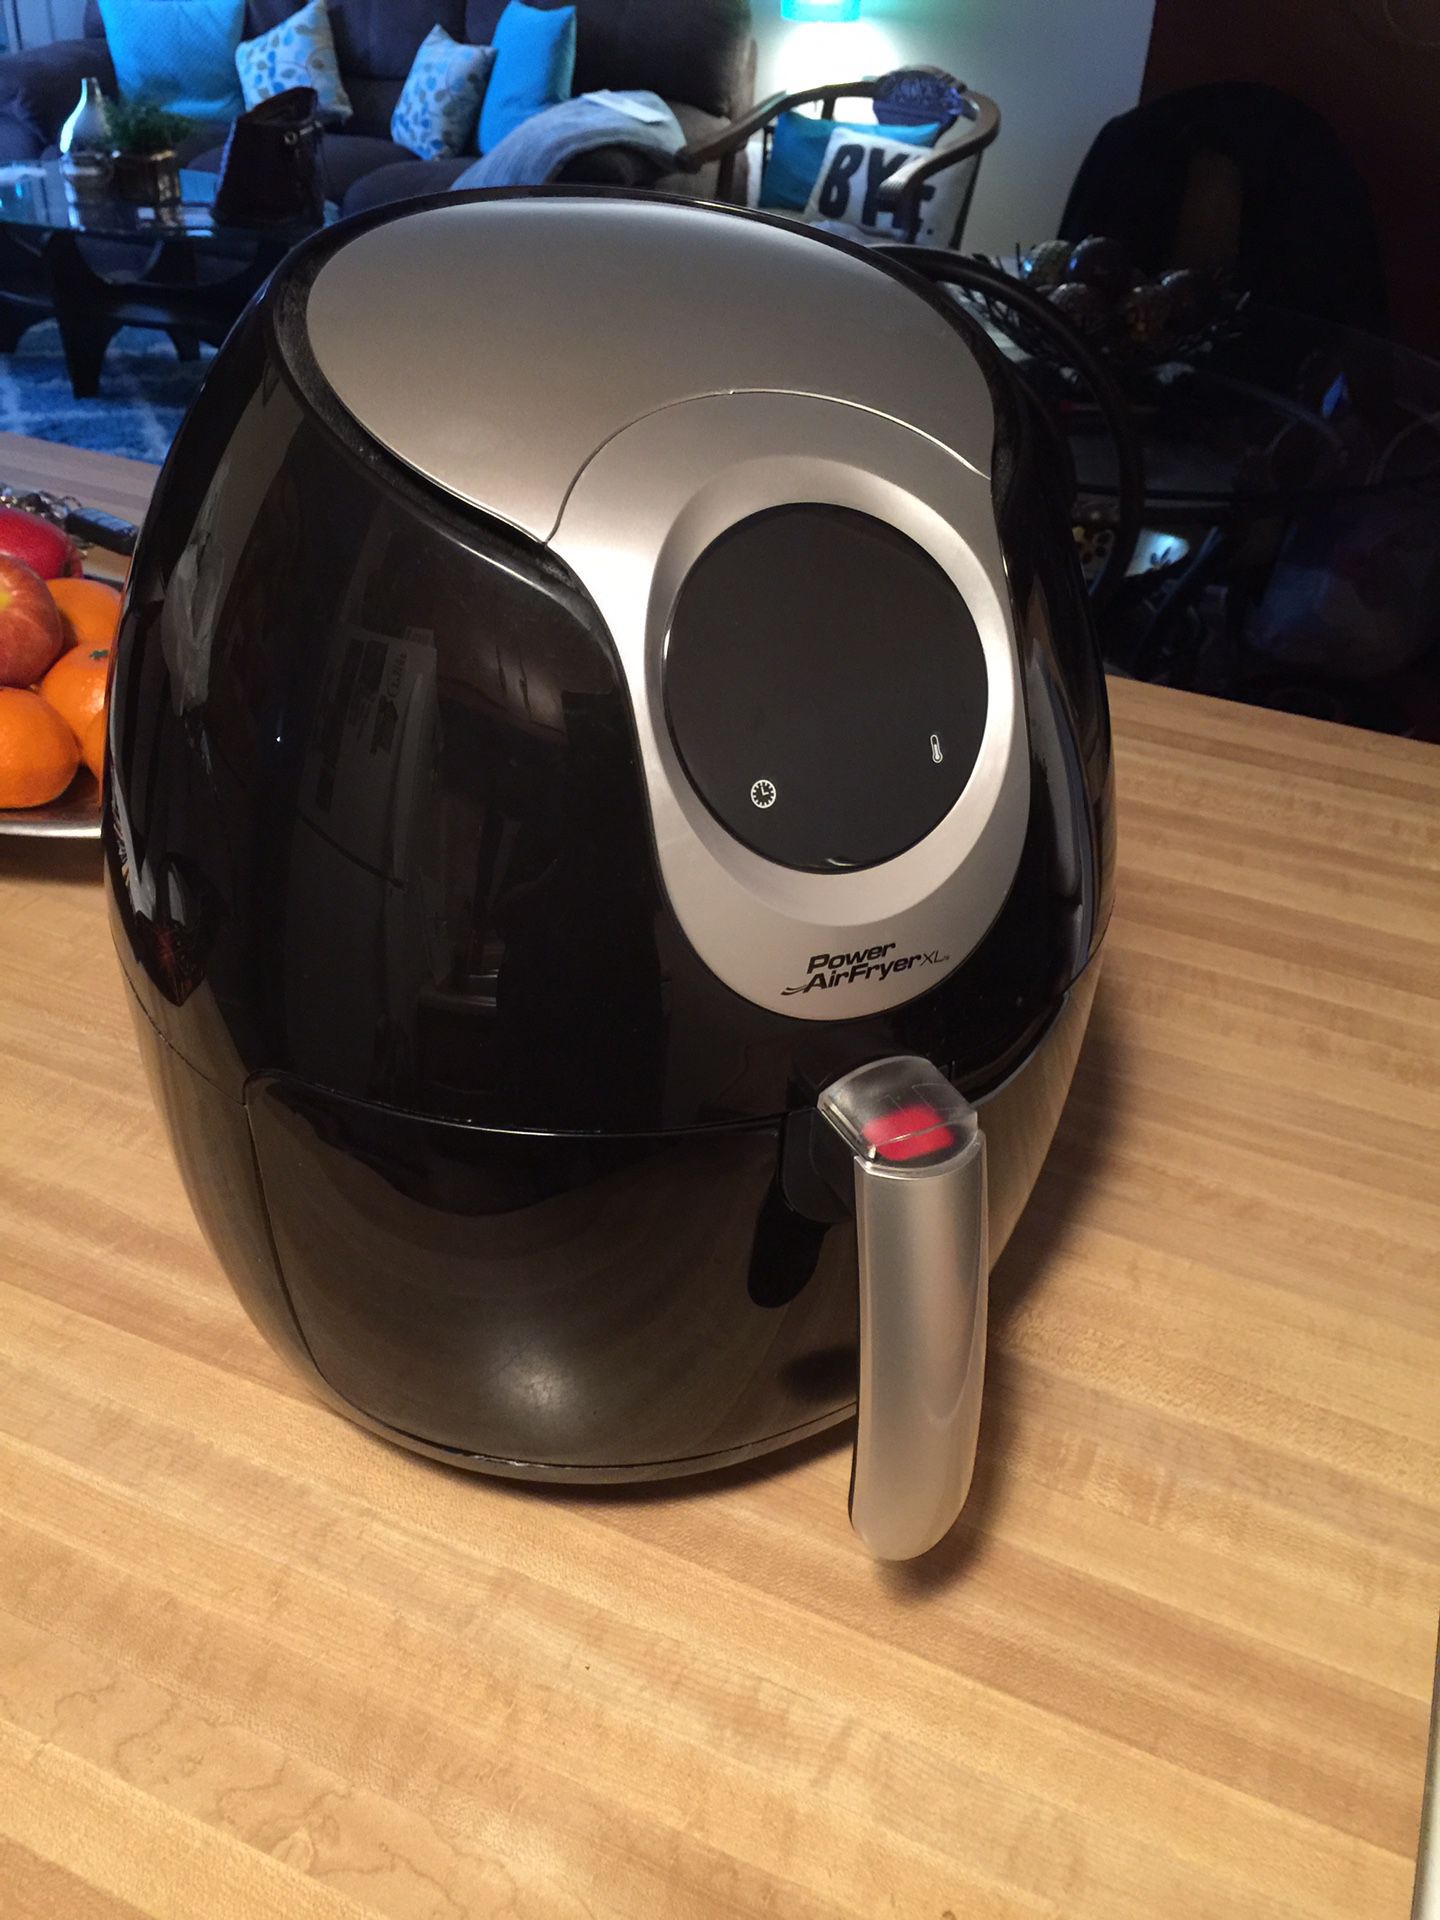 New Air Fryer with copper divider and baking pan.